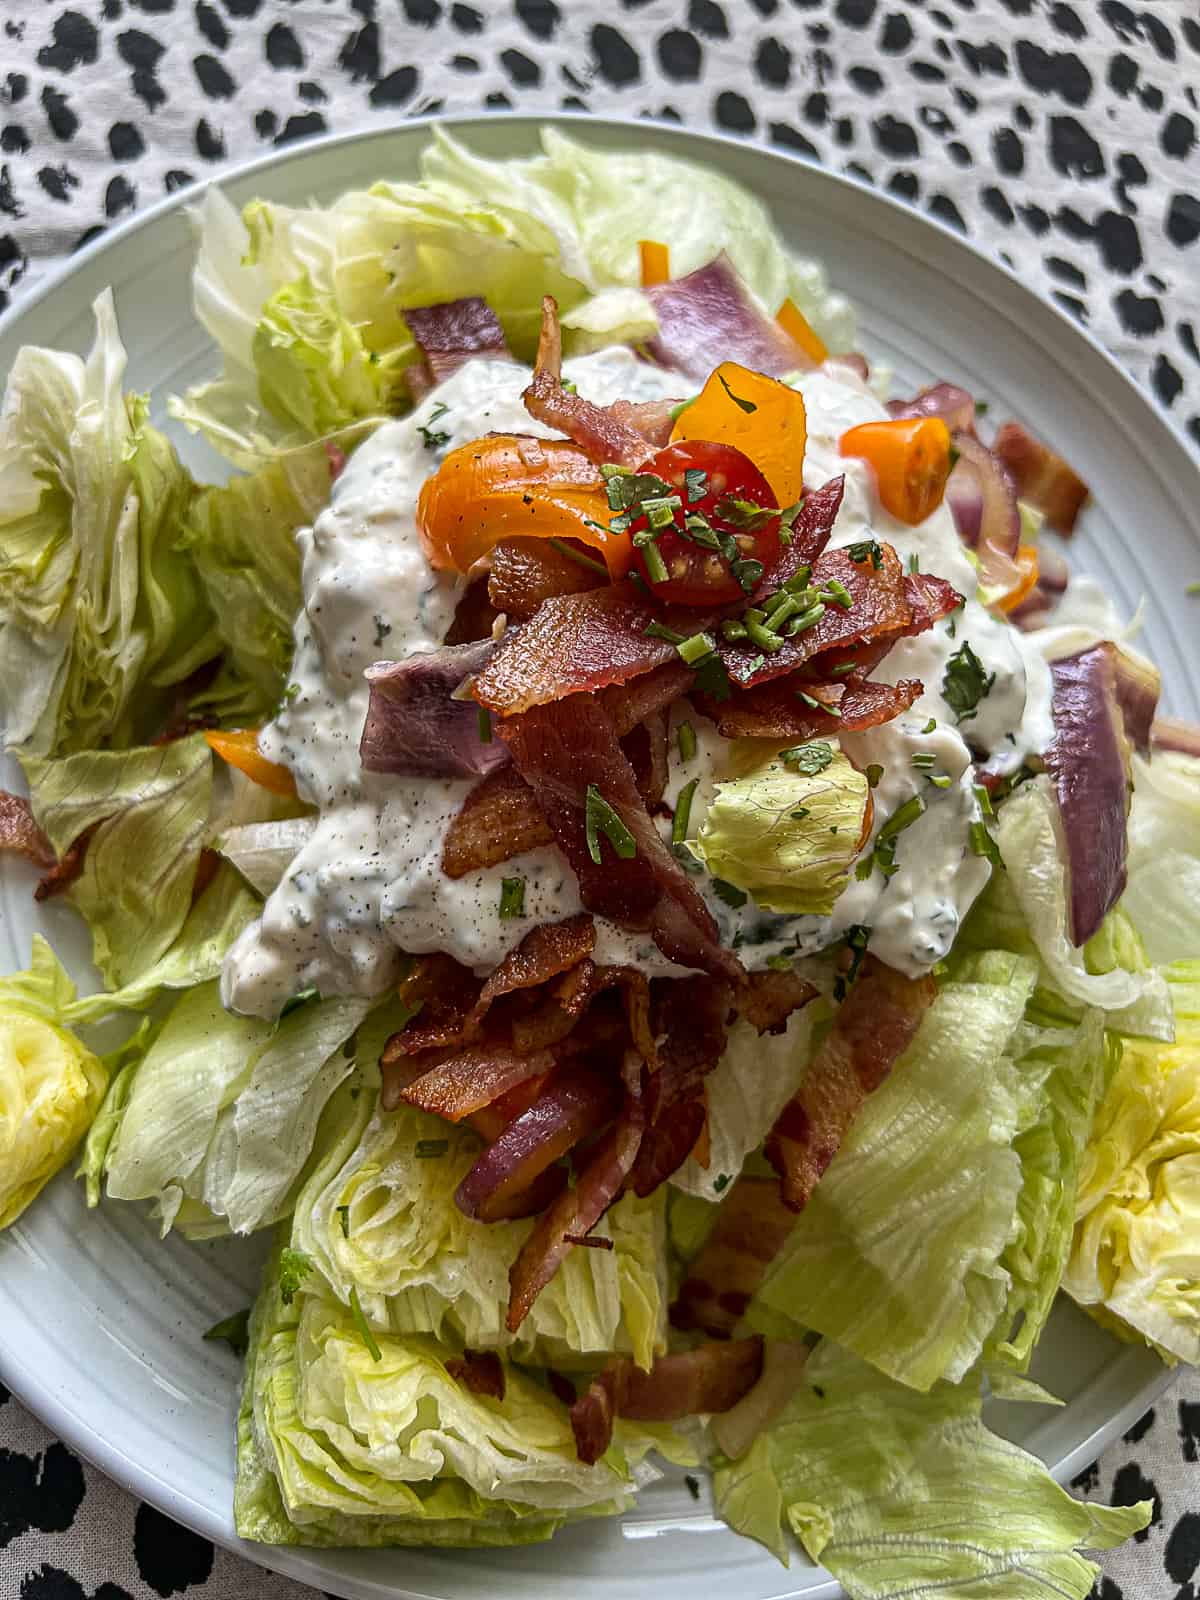 blue cheese dressing with bacon and vegetables on a wedge salad